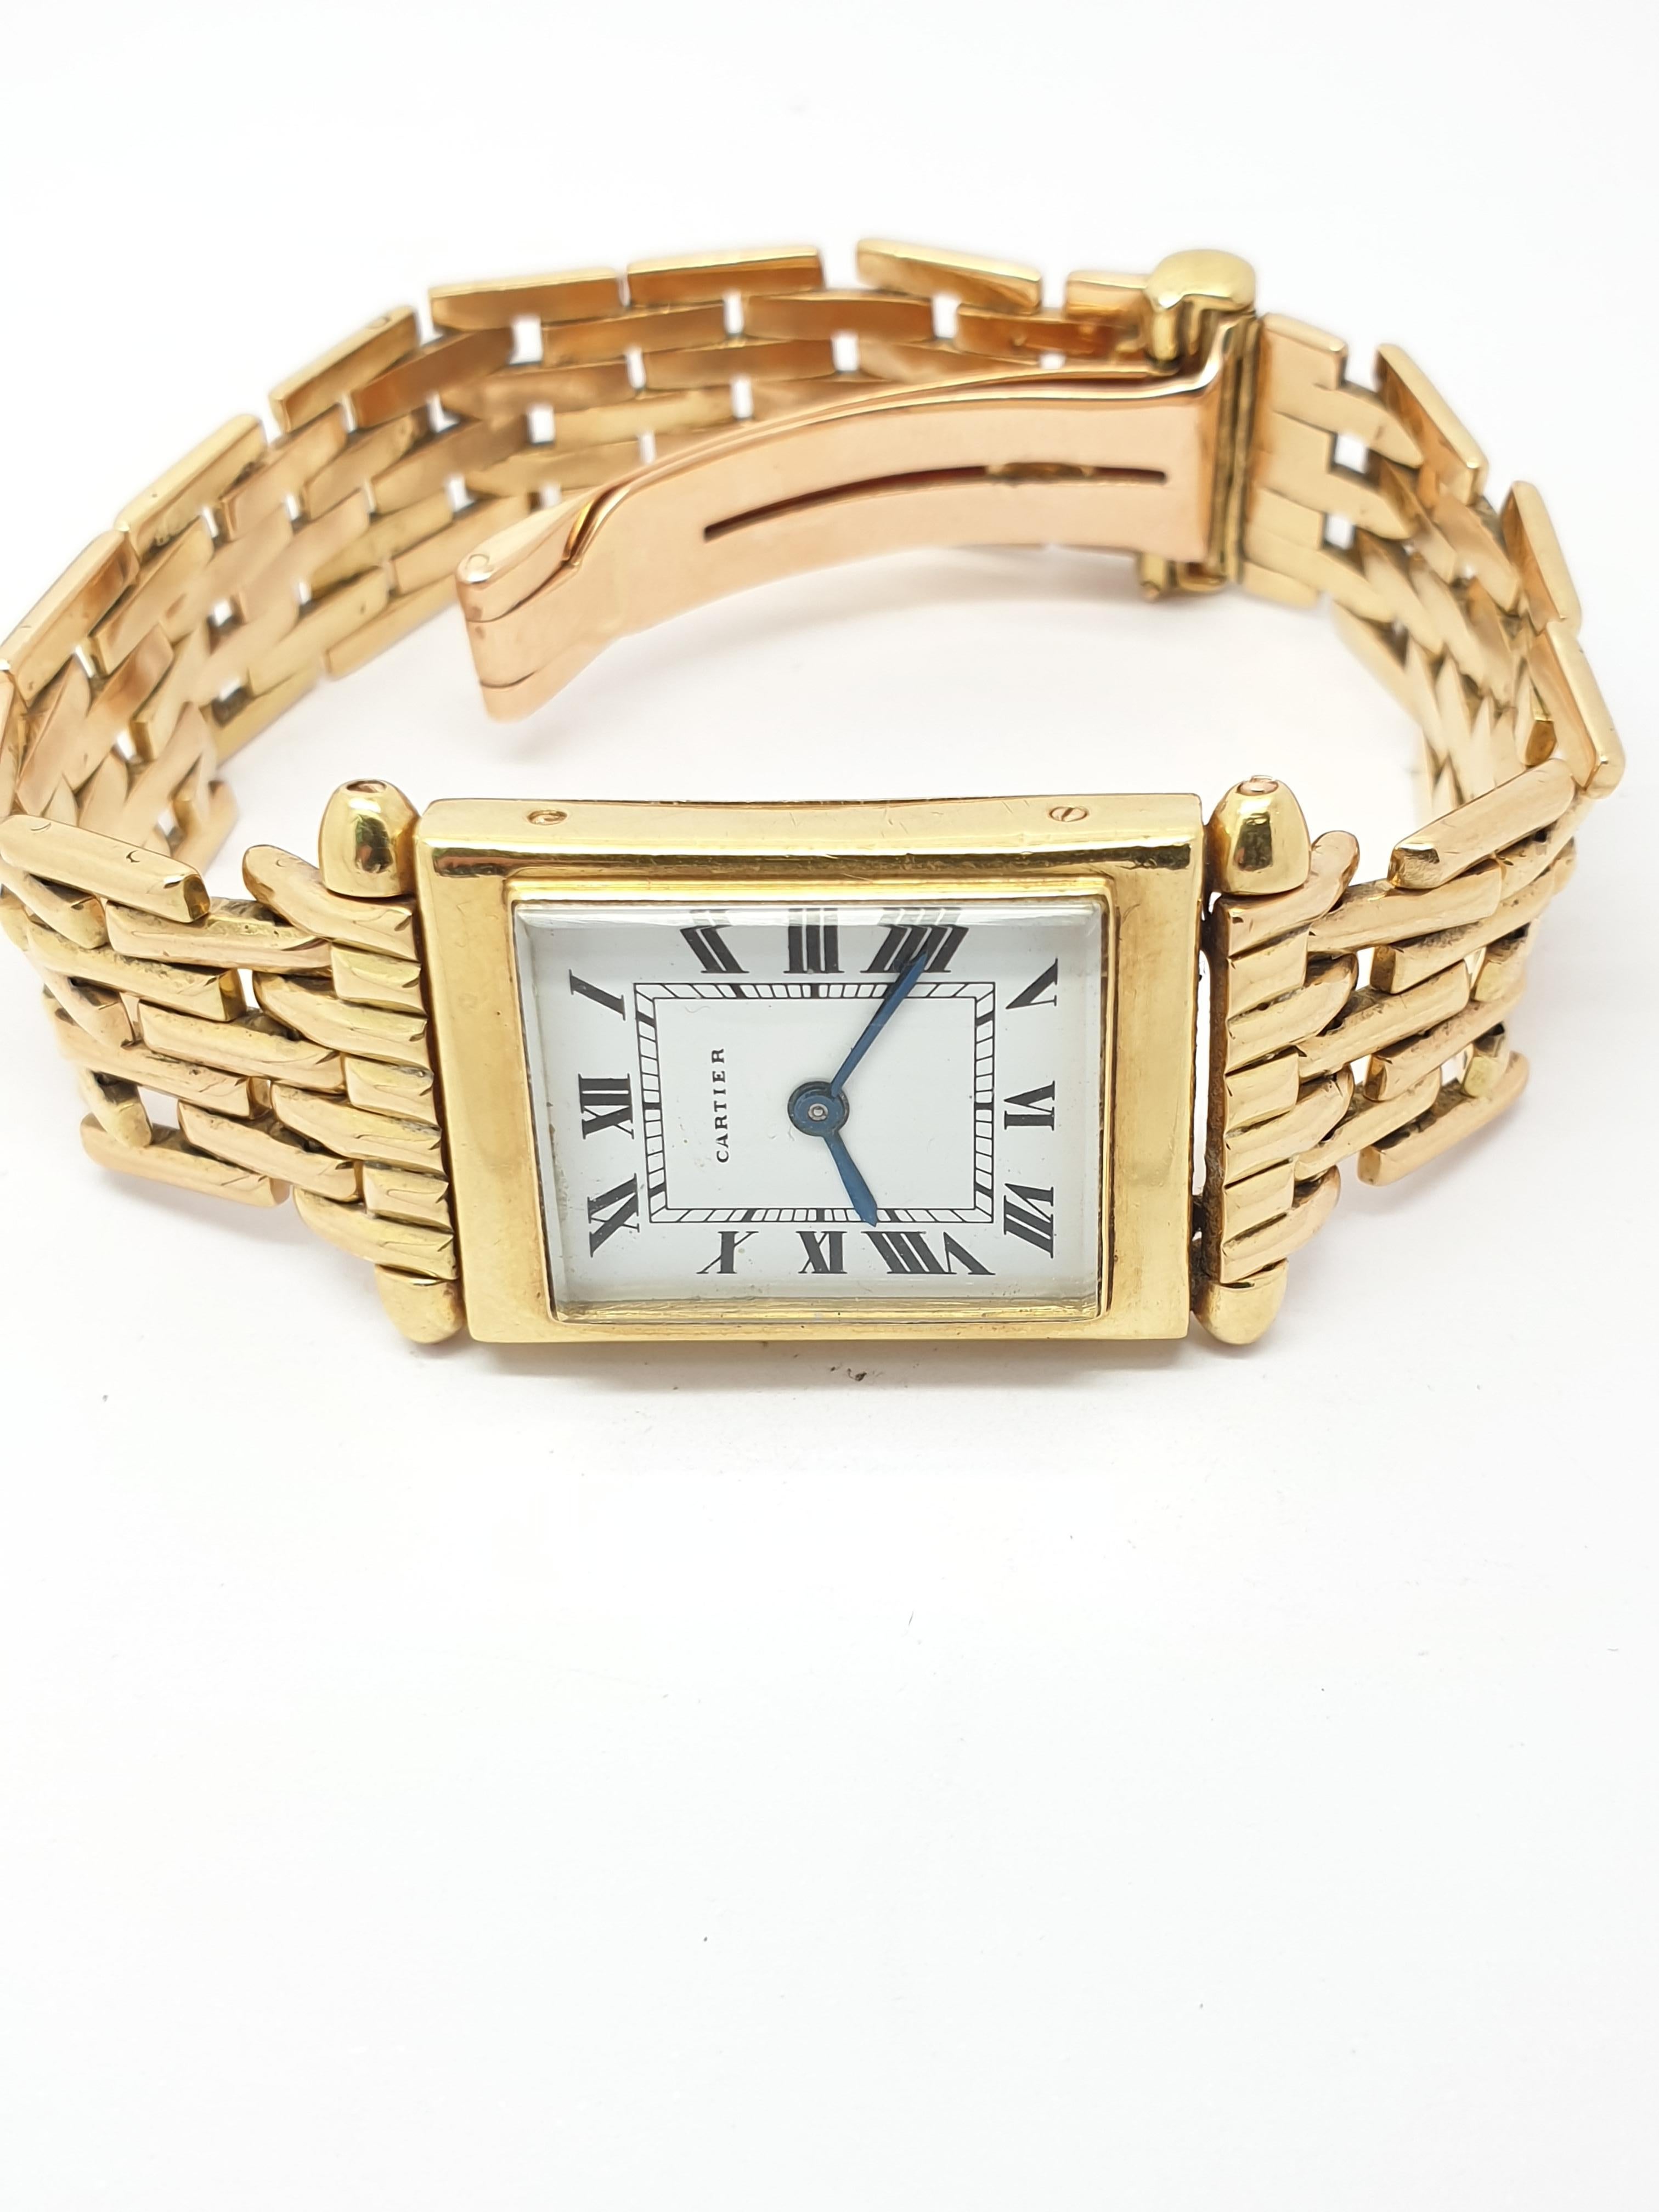 A Vintage late 1930's 18 kt Gold Cartier back wind  watch. Weighs approximately   grams (with movement). The case and the bracelet  are 18 kt yellow gold,hallmarked (see photos) . The back is engraved. The movement is European Watch  co. wind up in